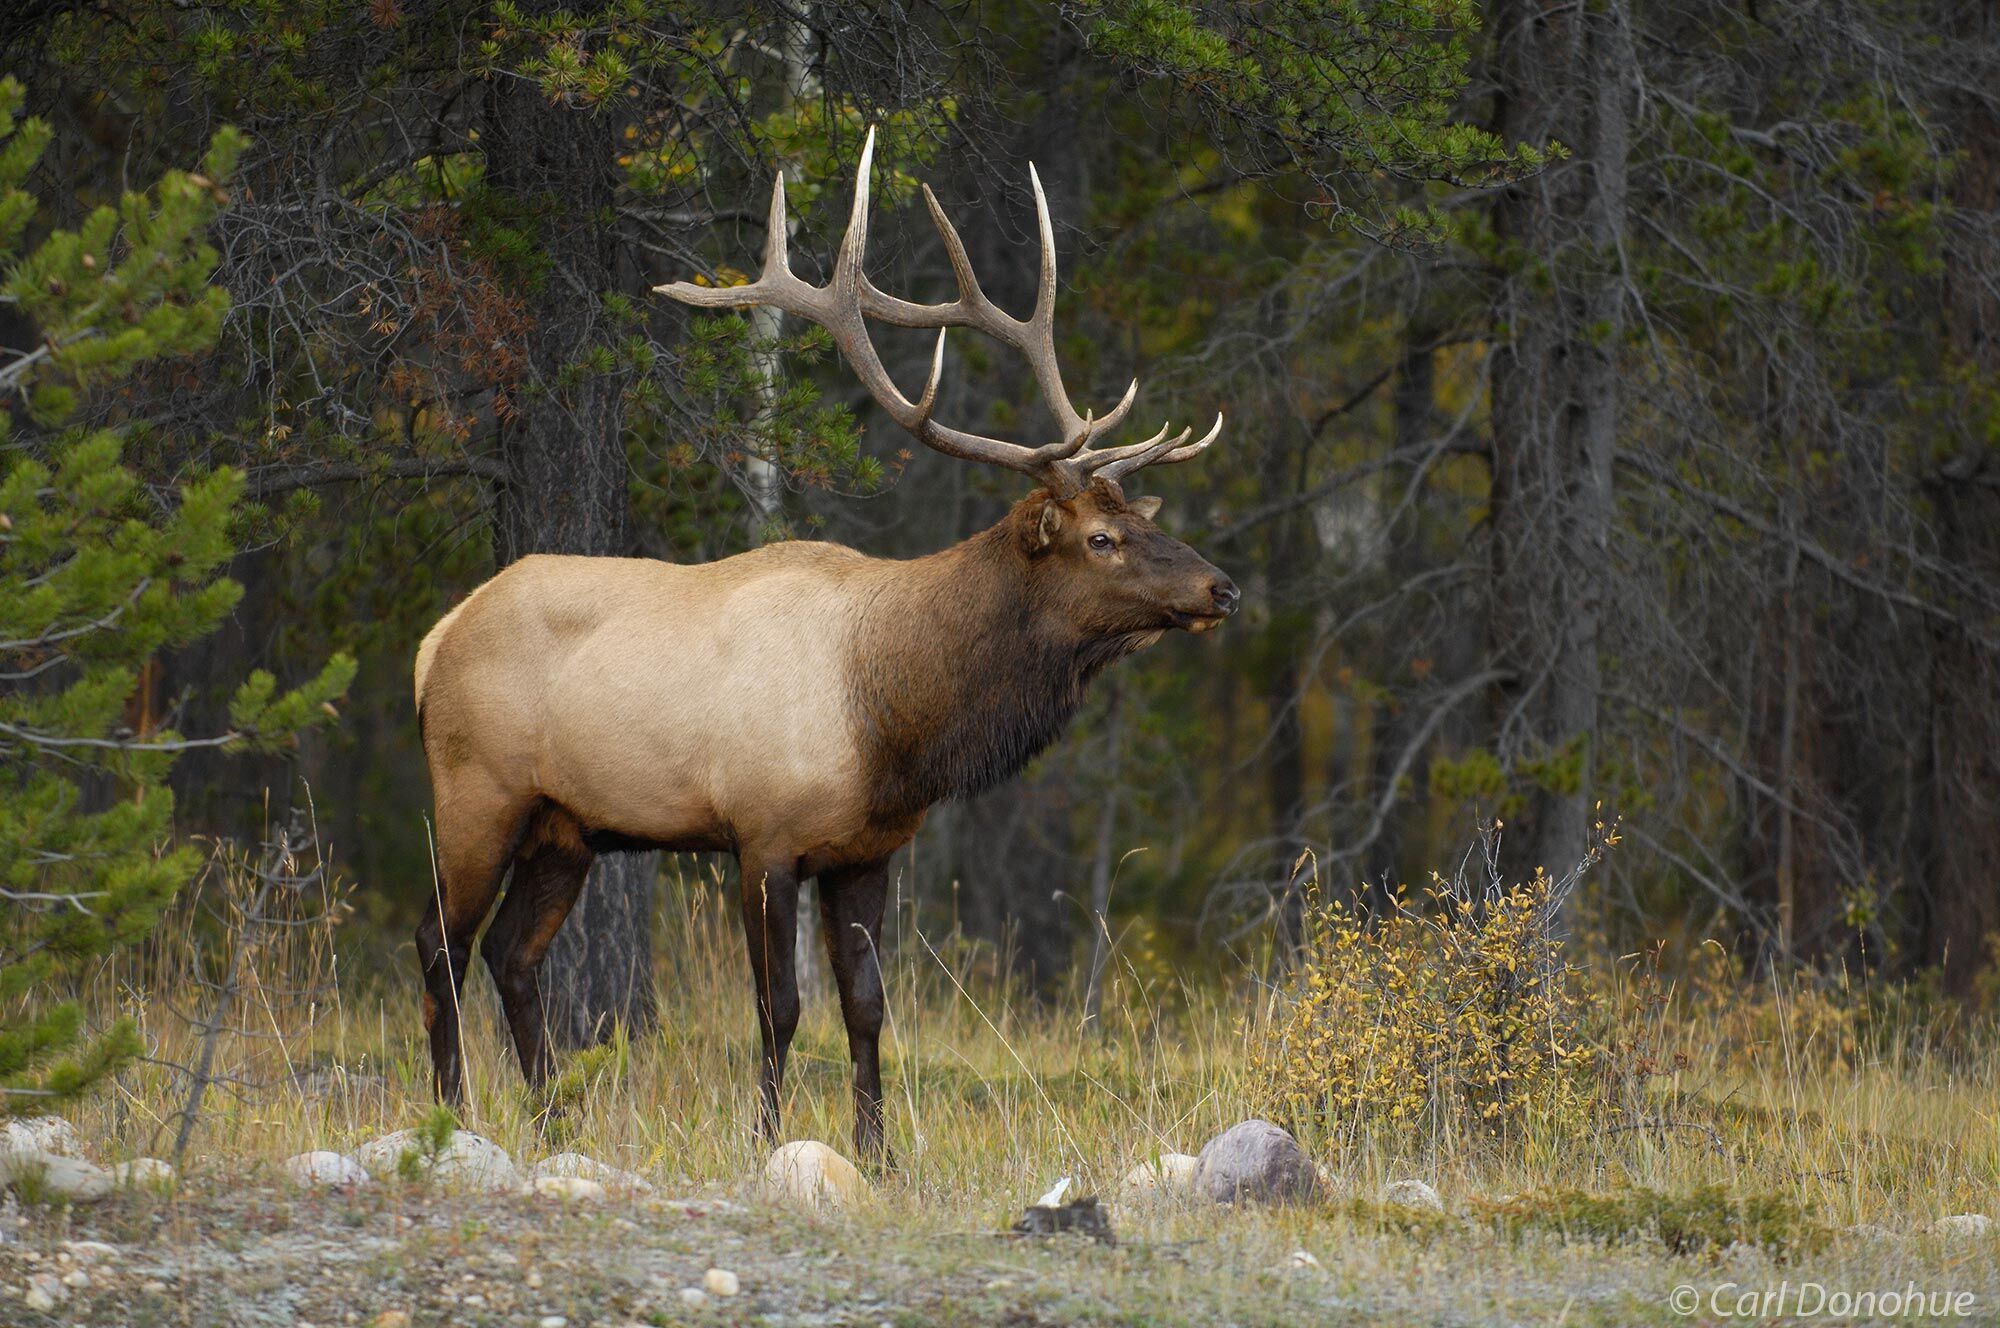 Bull elk standing at the forest edge. The bulls shed the velvet covering of their antlers in early fall, and go into rut in mid...